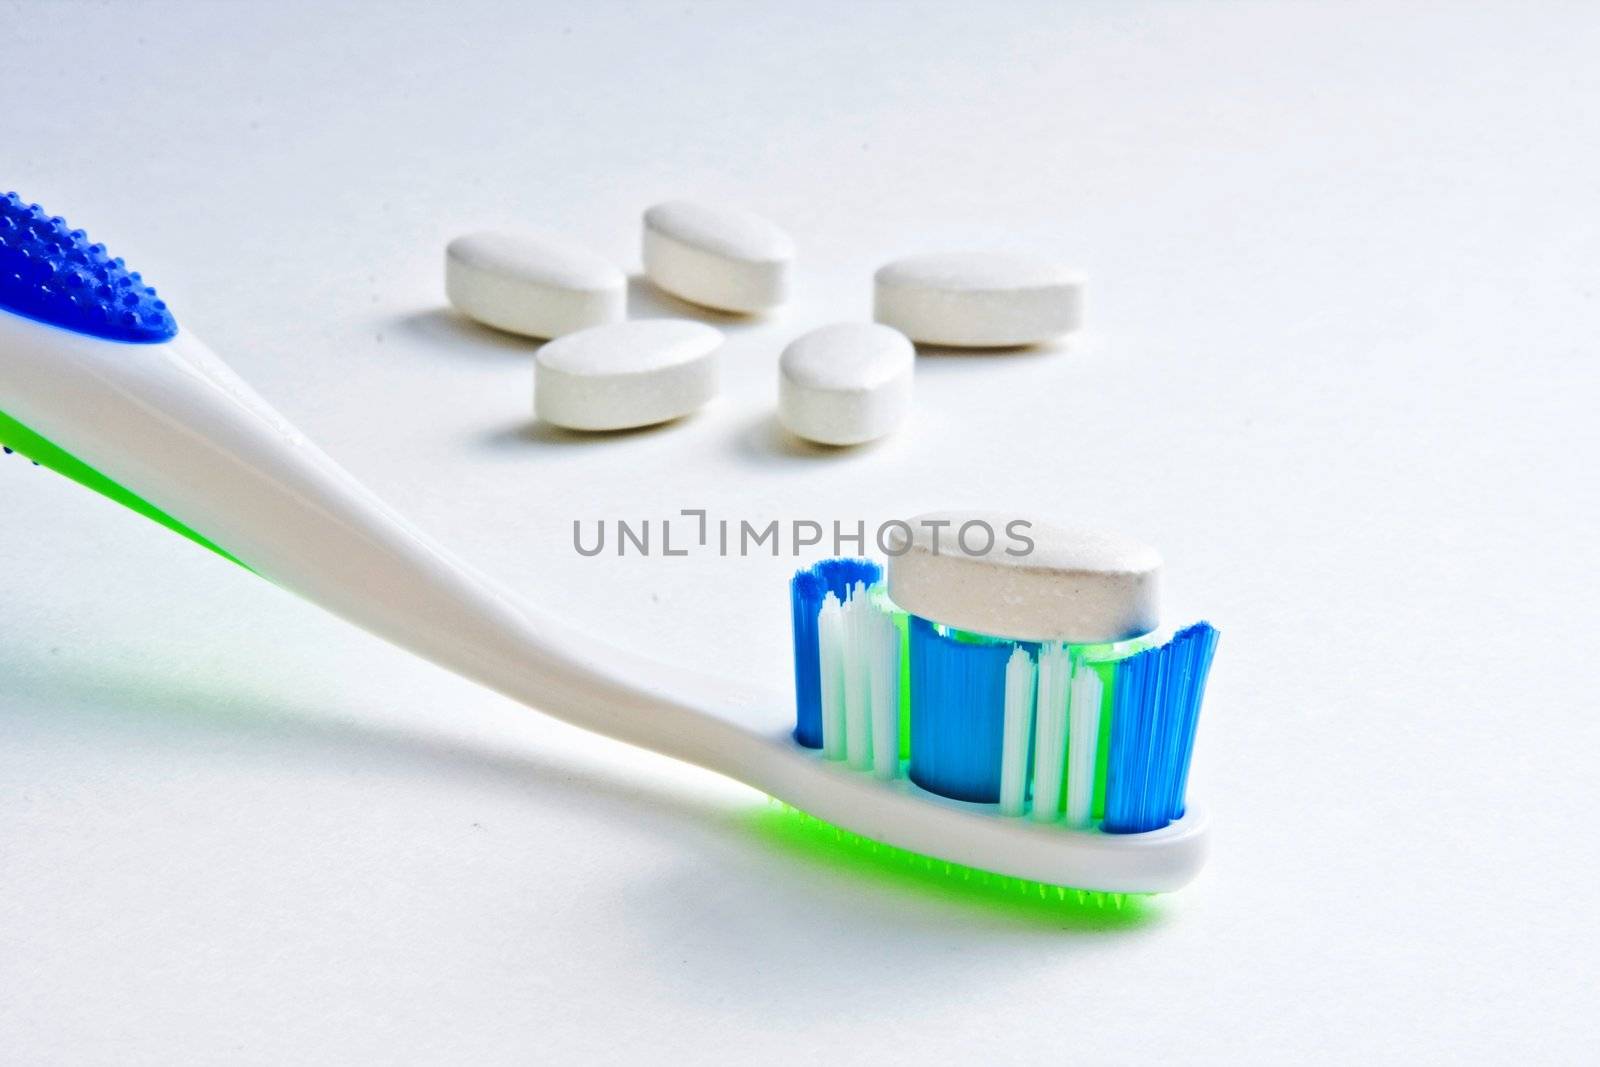 Calcium tablet resting on toothbrush bristles with other tablets in background